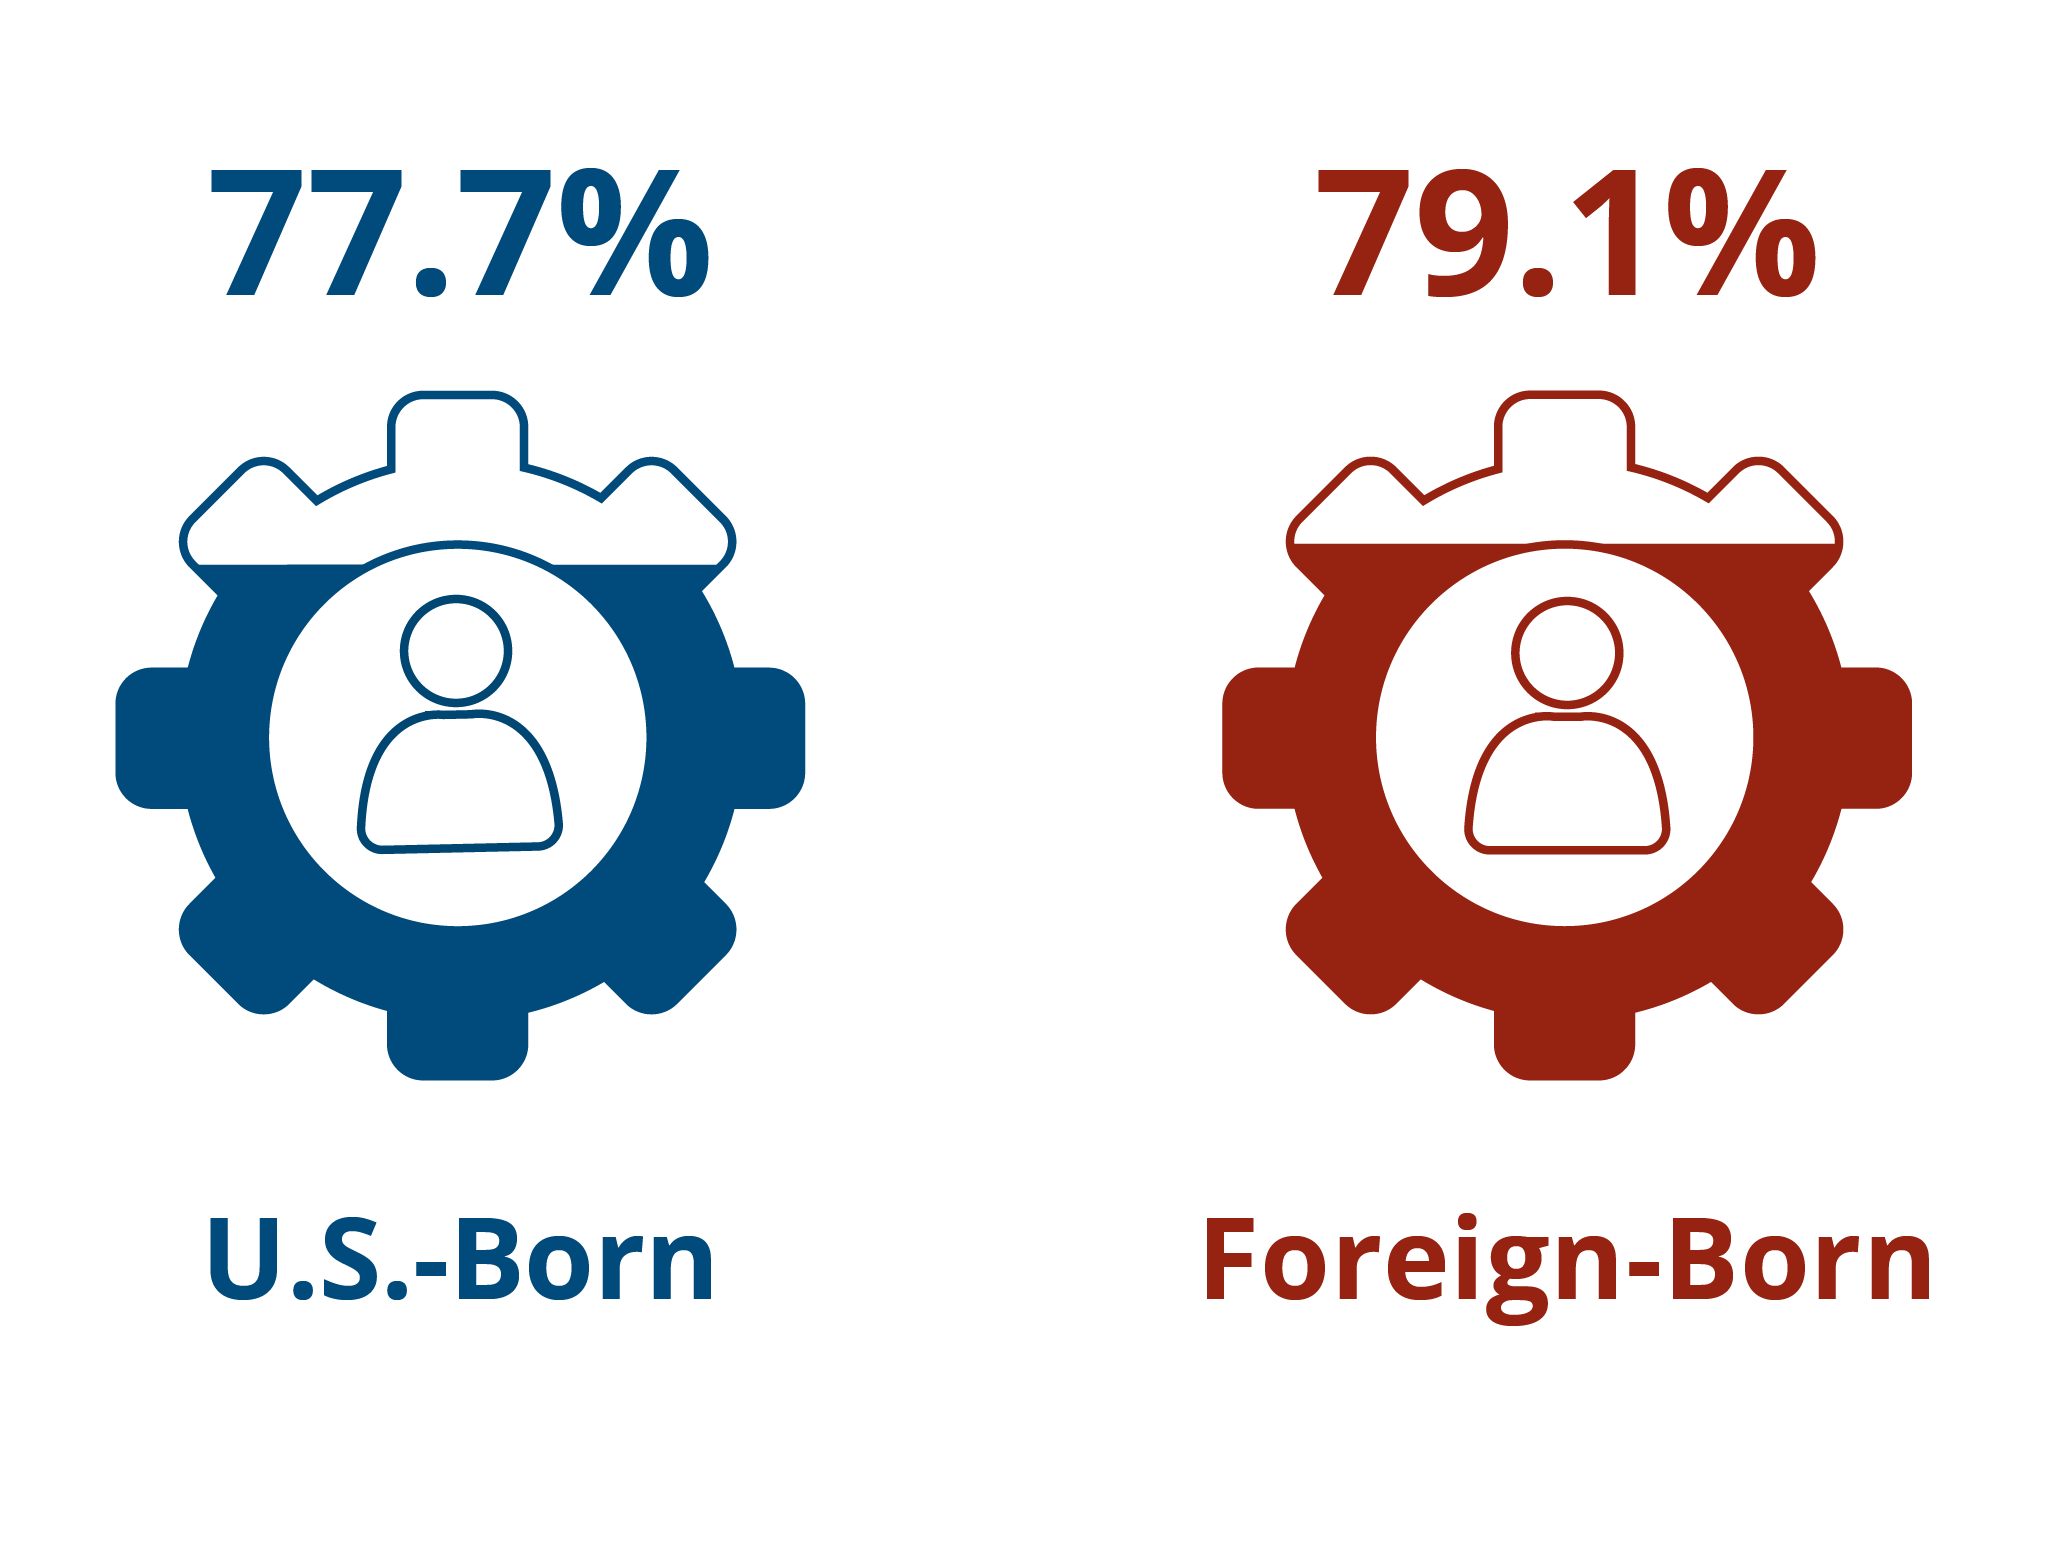 Immigrants in Massachusetts have a 77.7% rate of workforce participation, while U.S.-born residents in Massachusetts have a 79.1% rate of workforce participation.